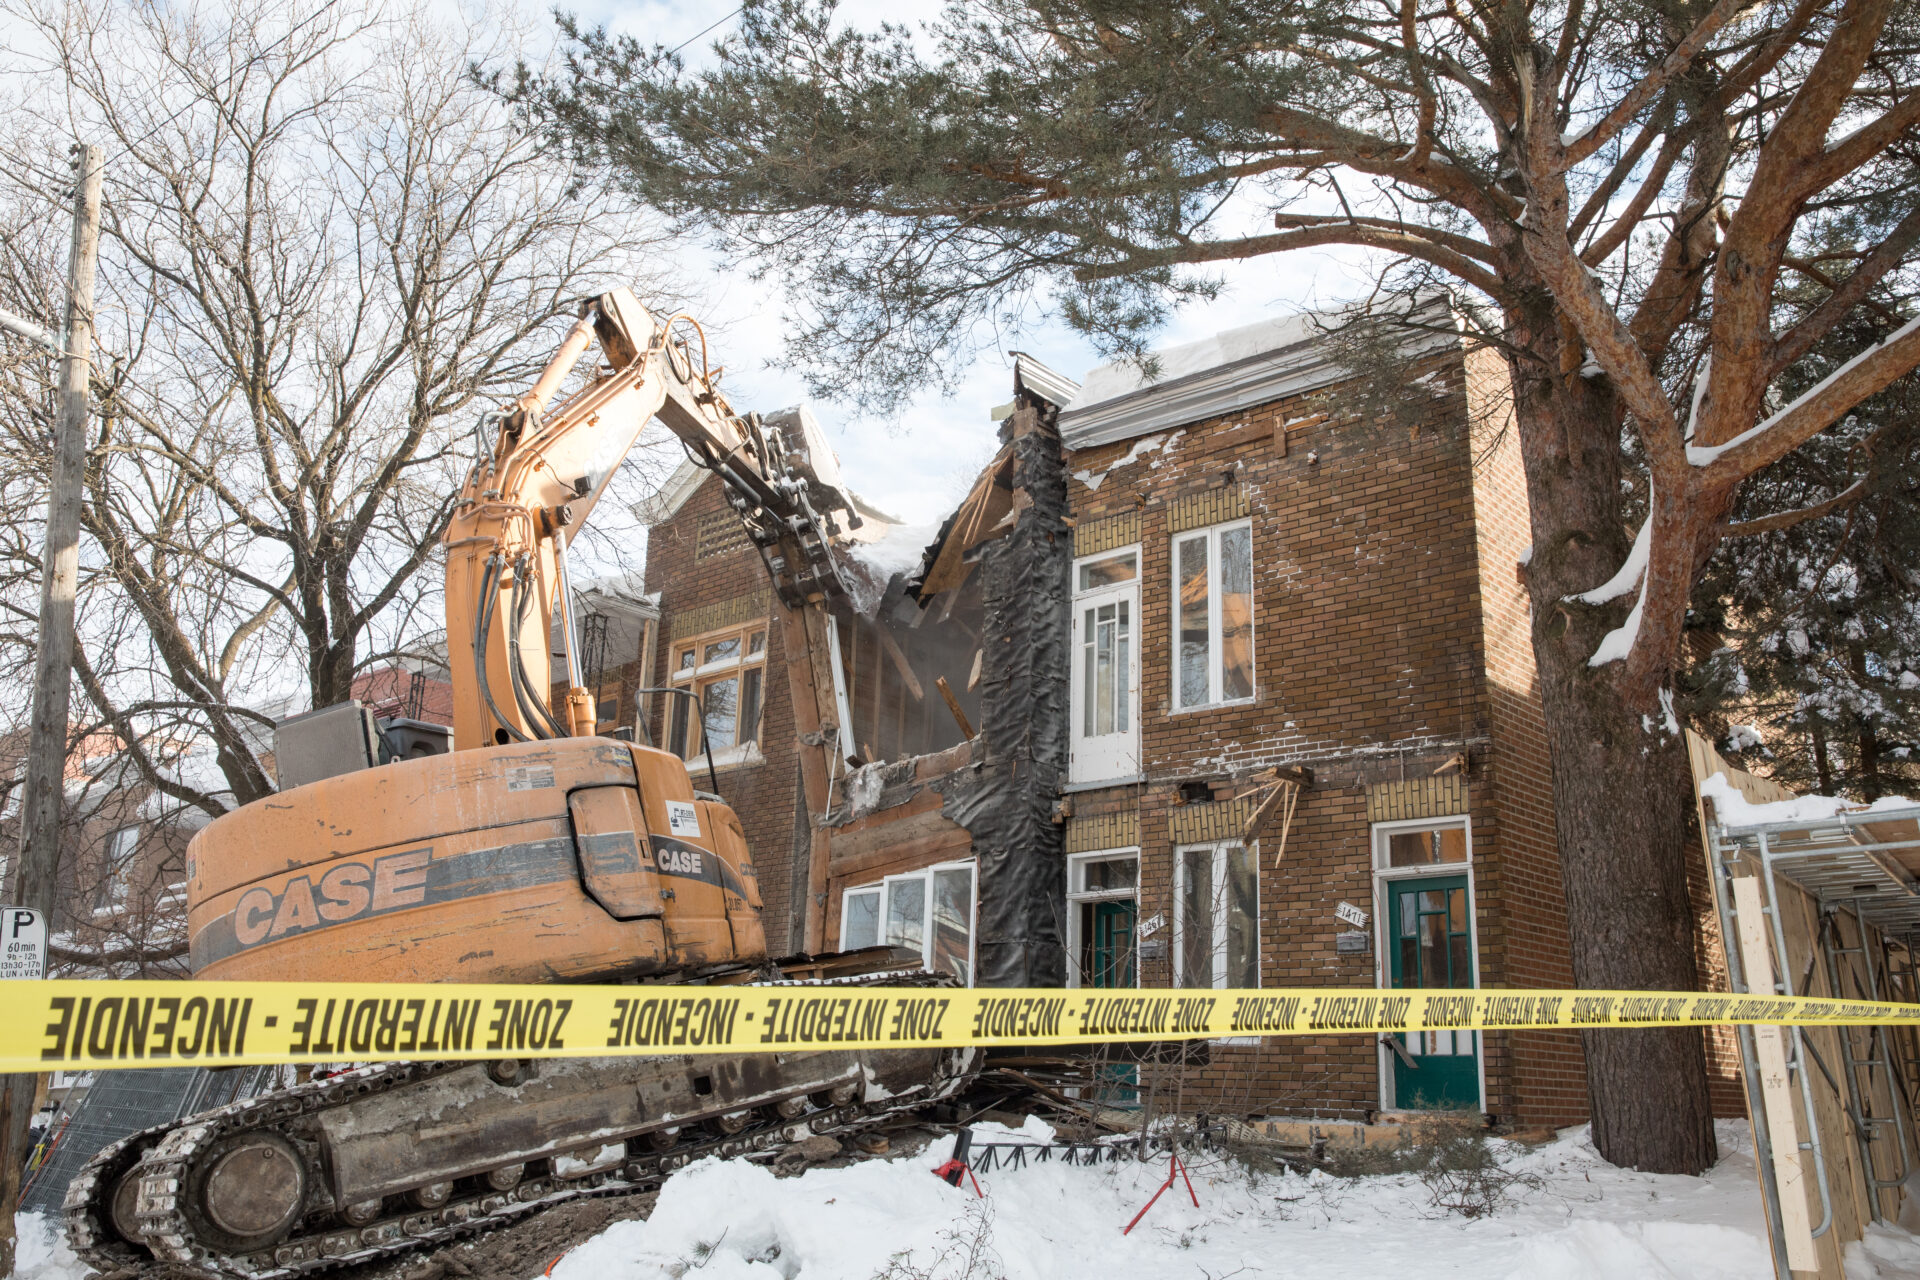 The claw of an excavator slashes through the roof of a two-storey brick fourplex on a tree-lined street. The front lawn is covered in snow.